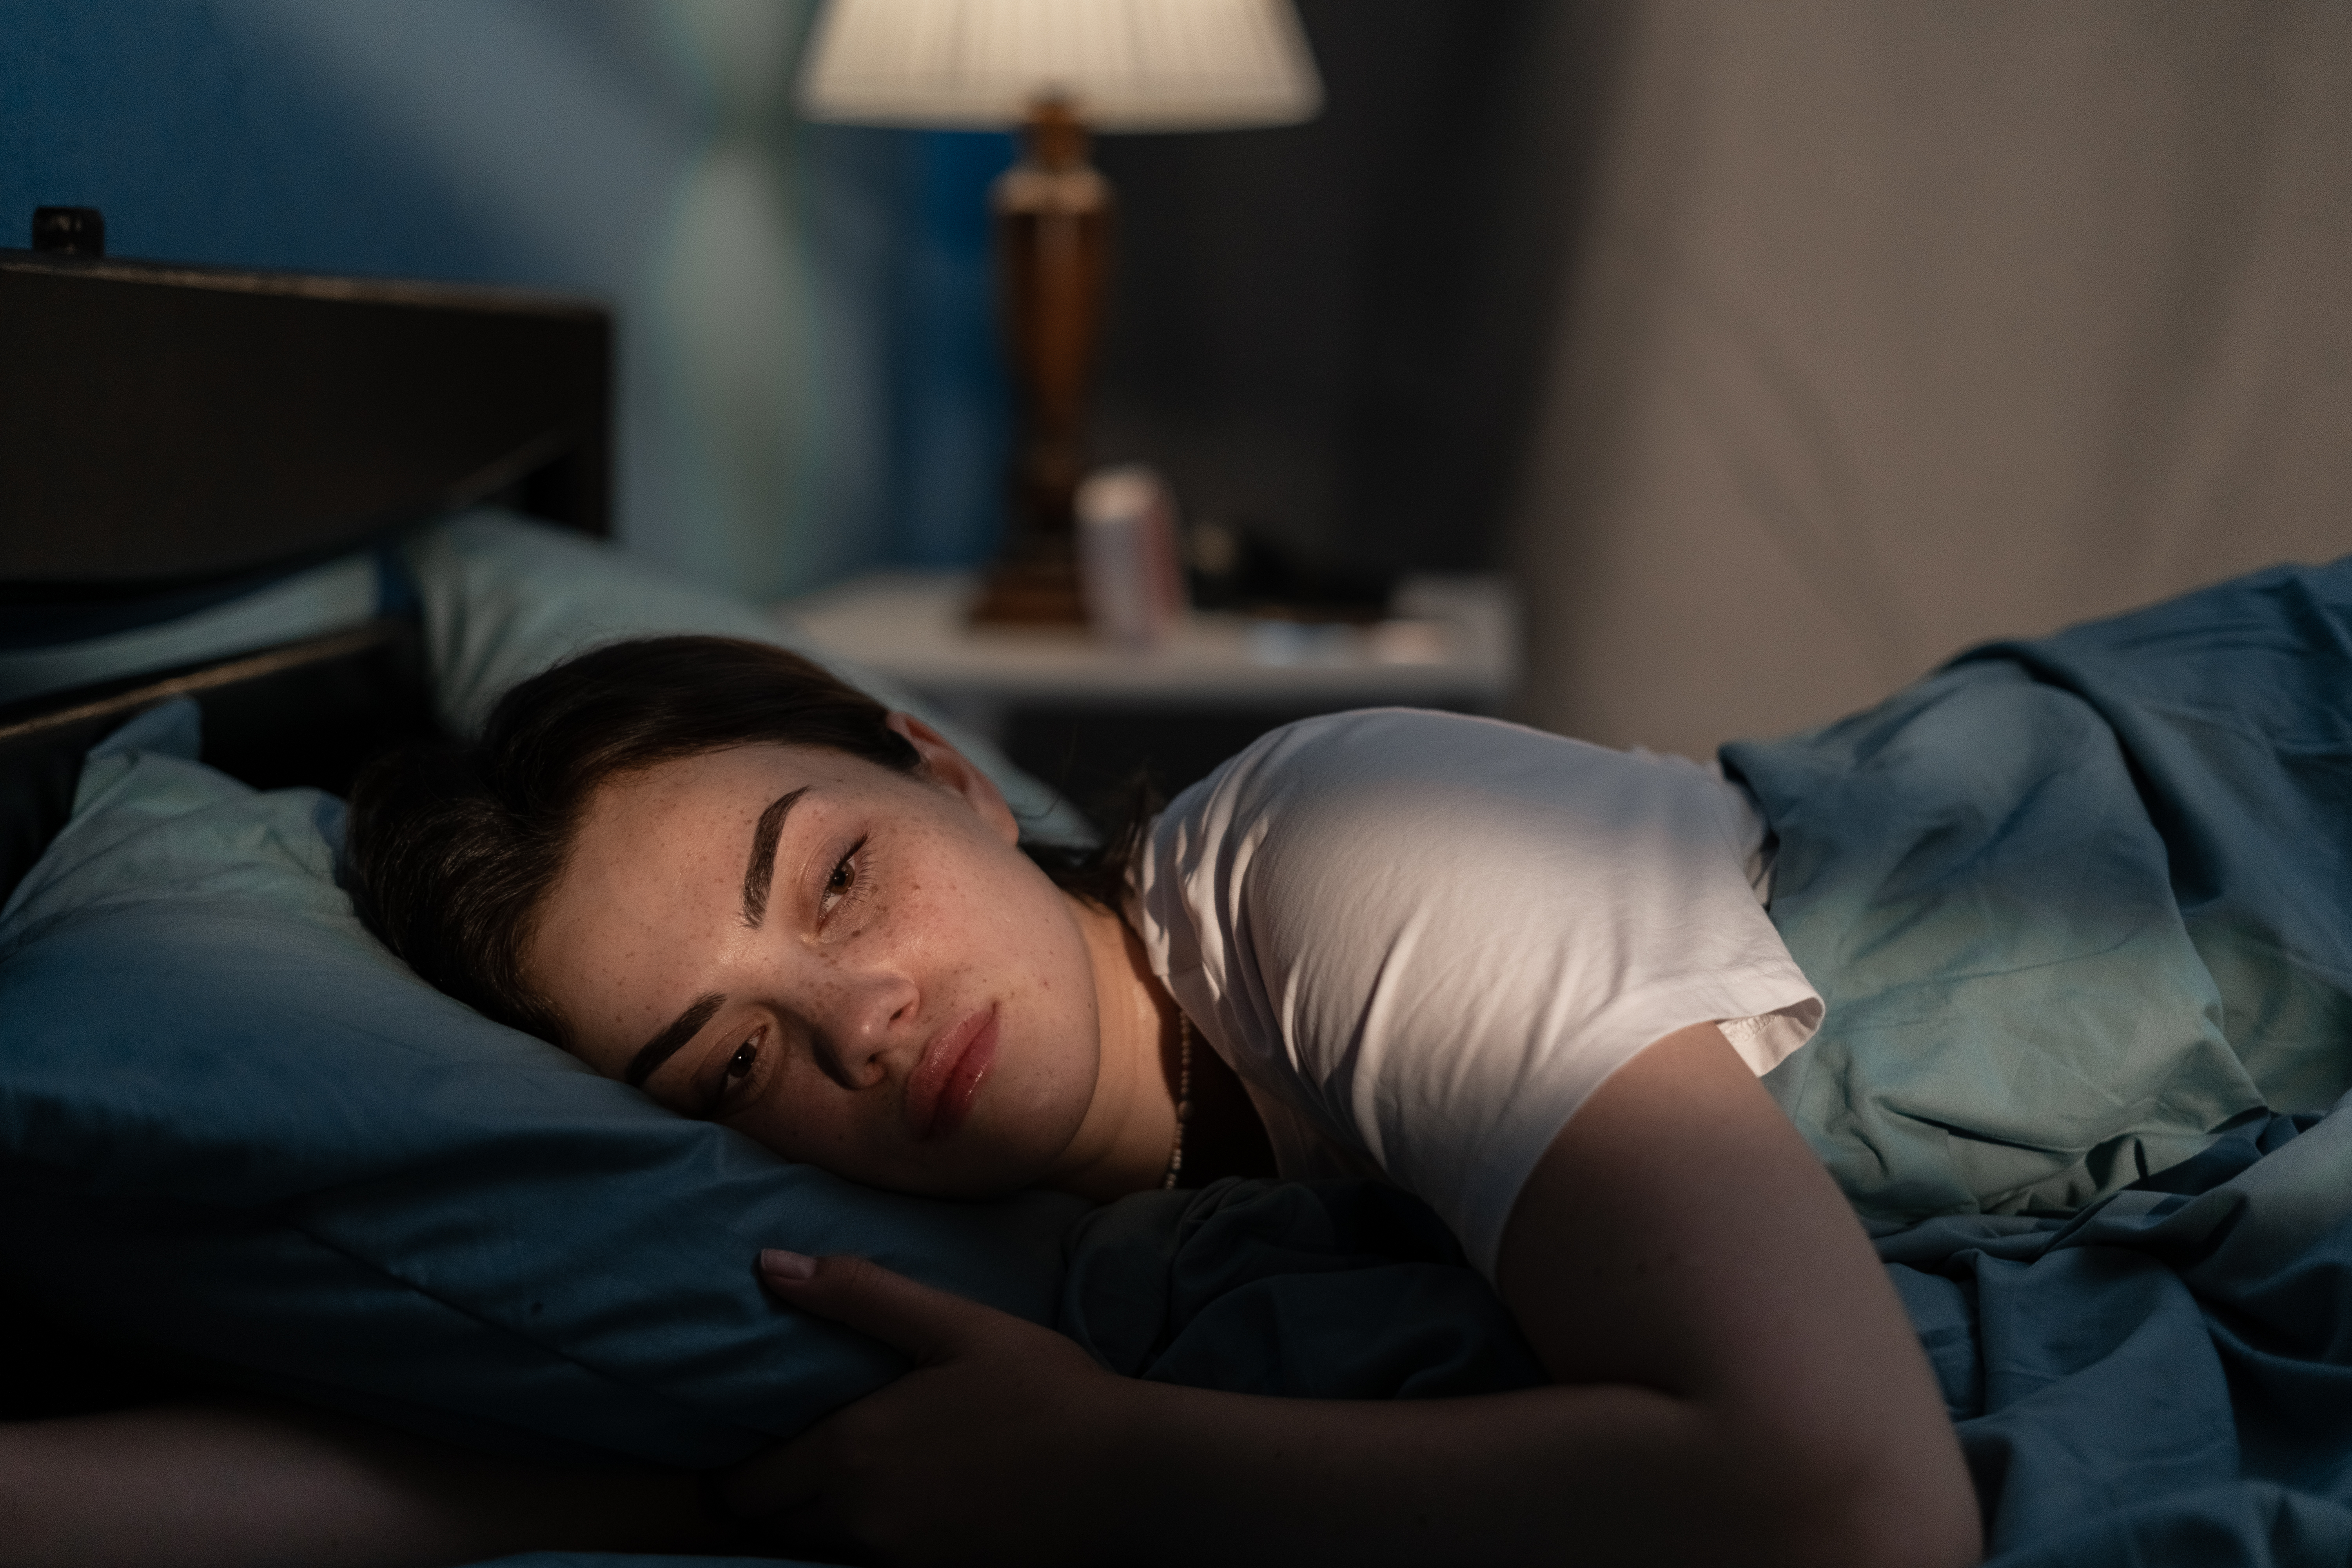 Young sad woman lying in bed late at night trying to sleep suffering insomnia. Girl in bed scared on nightmares looking worried and stressed. Sleeping disorder and insomnia | Source: Getty Images